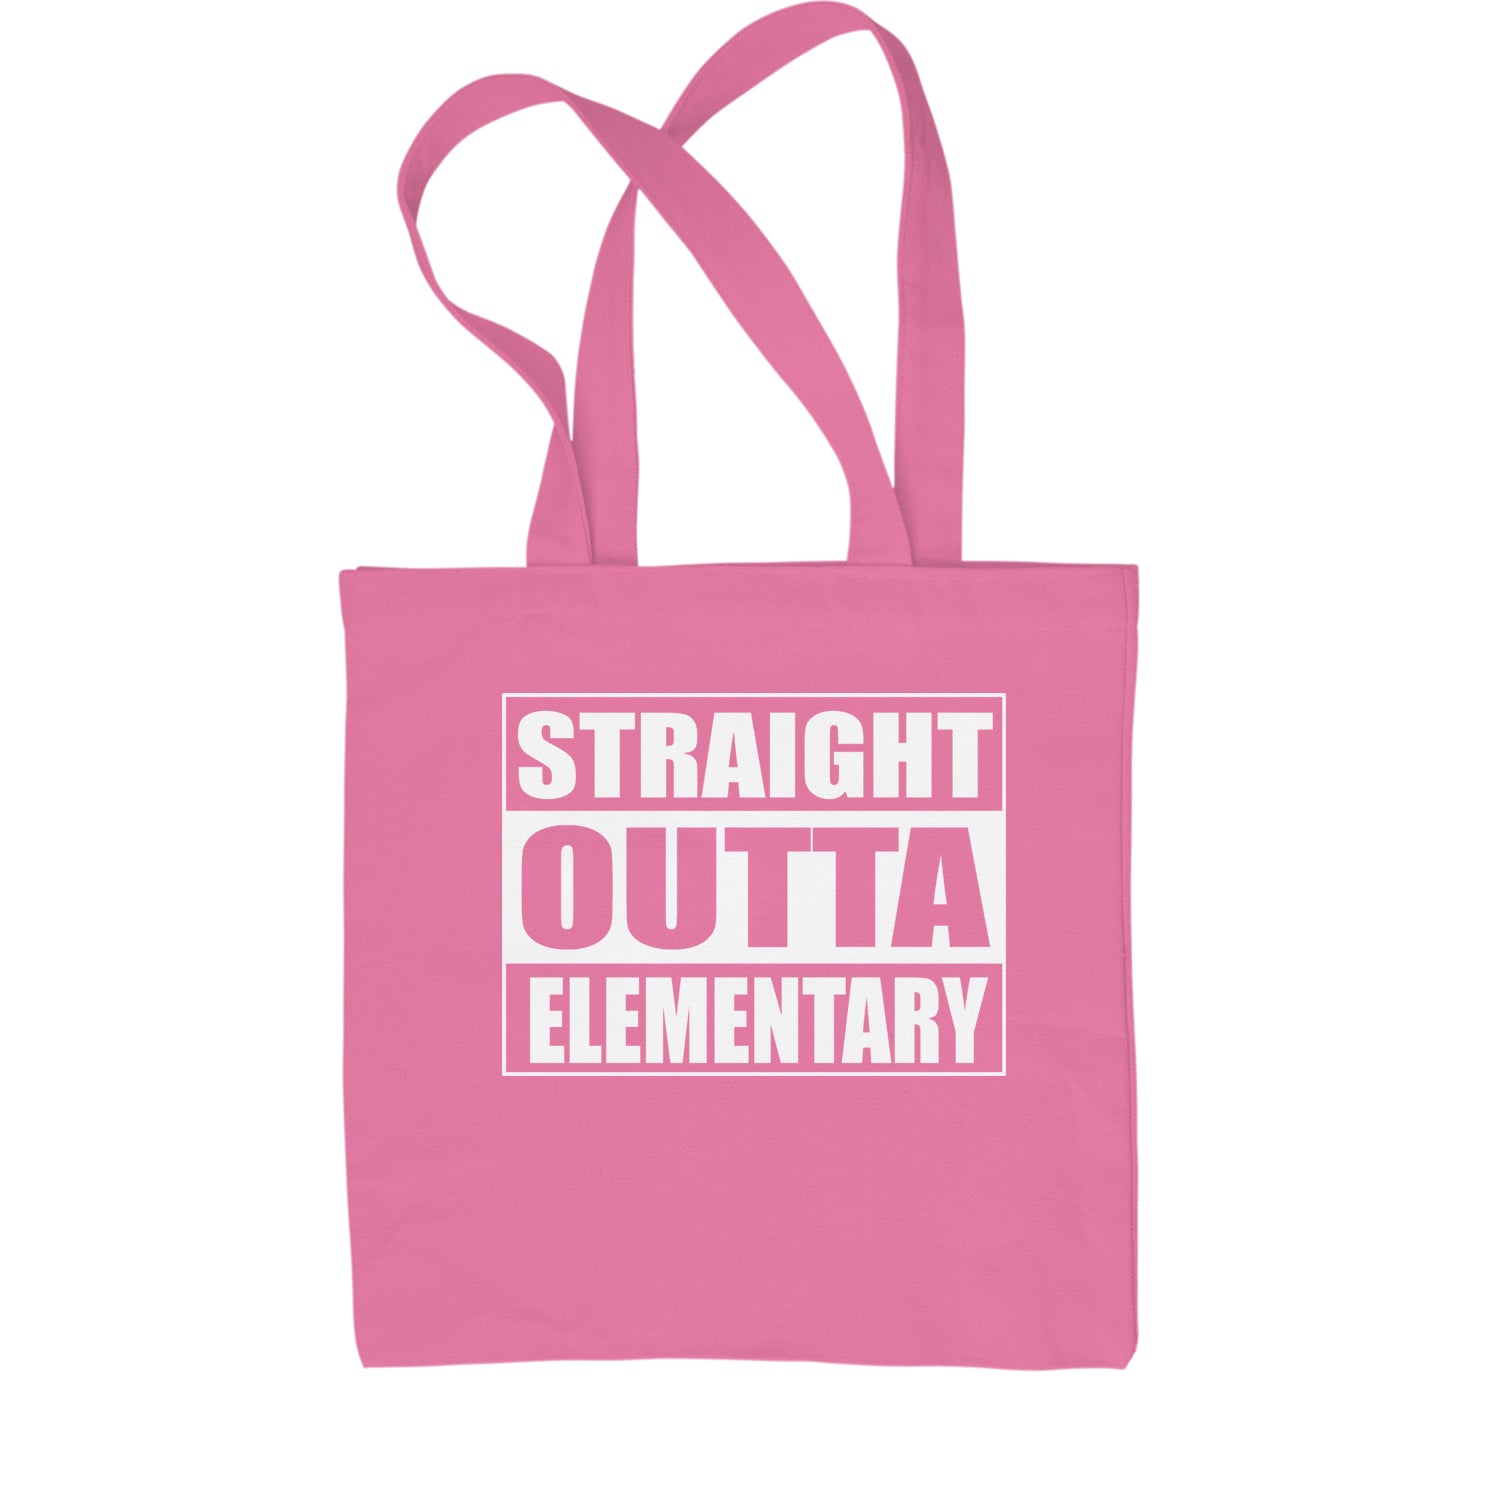 Straight Outta Elementary Shopping Tote Bag 2020, 2021, 2022, class, of, quarantine, queen by Expression Tees